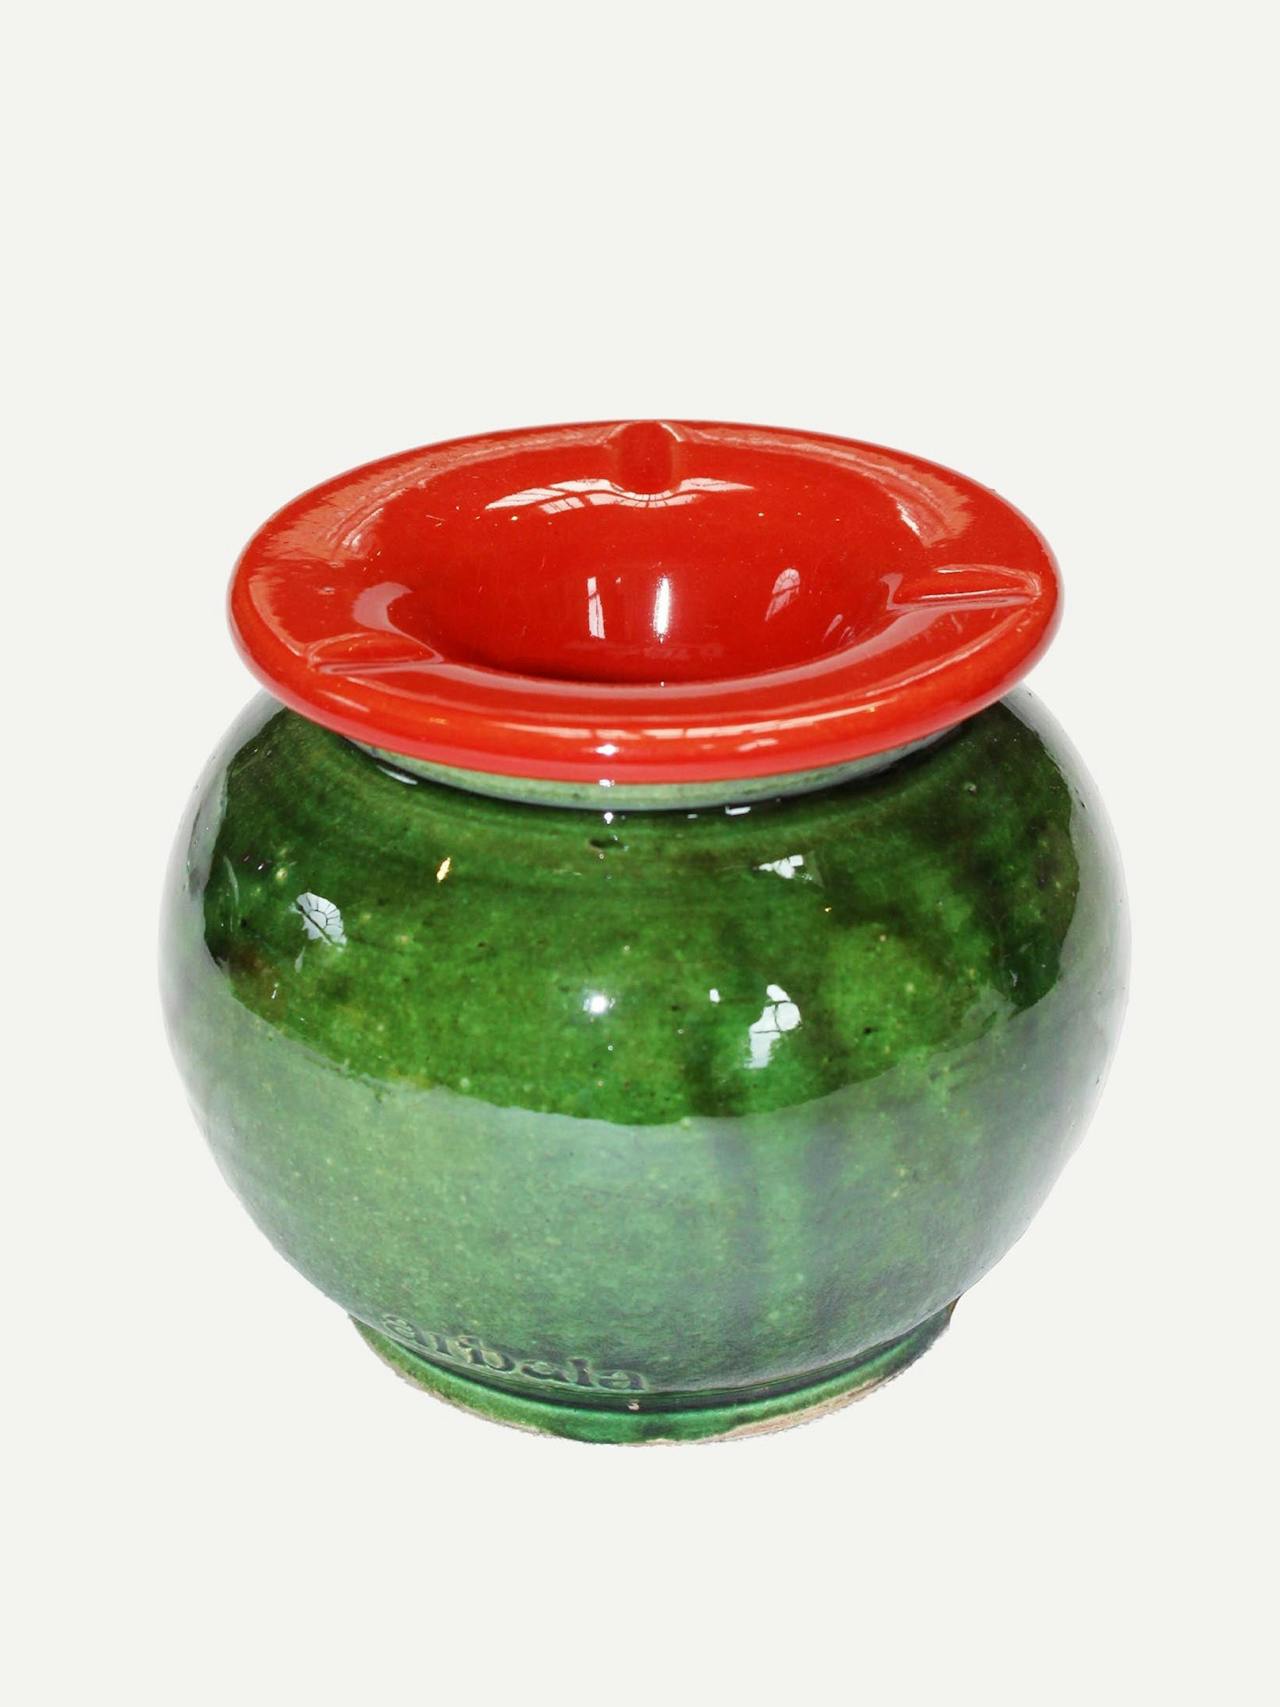 Red and green Dolly ashtray